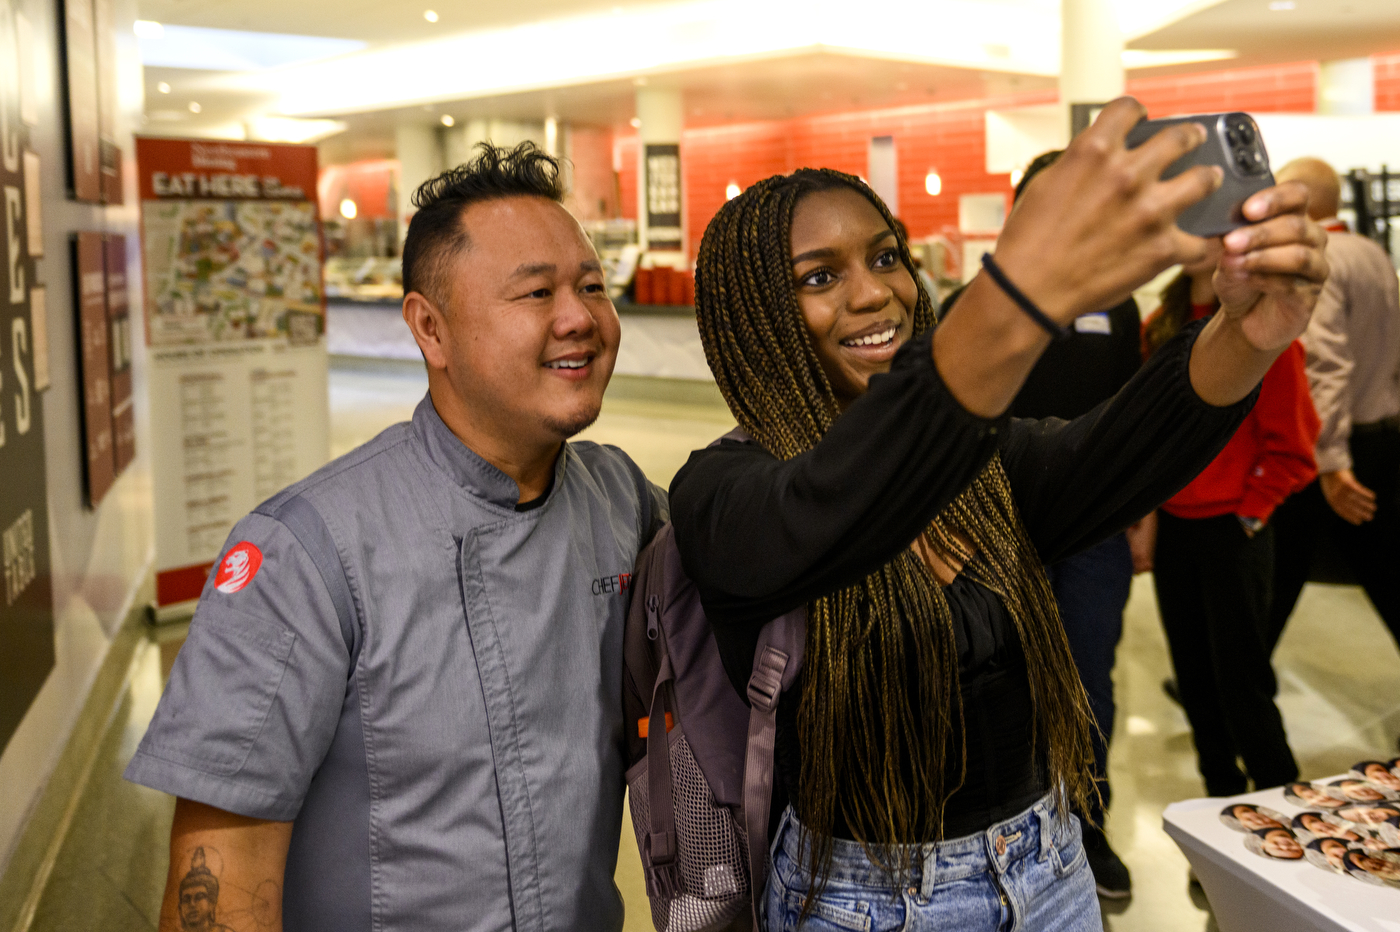 chef tila taking selfie with a student